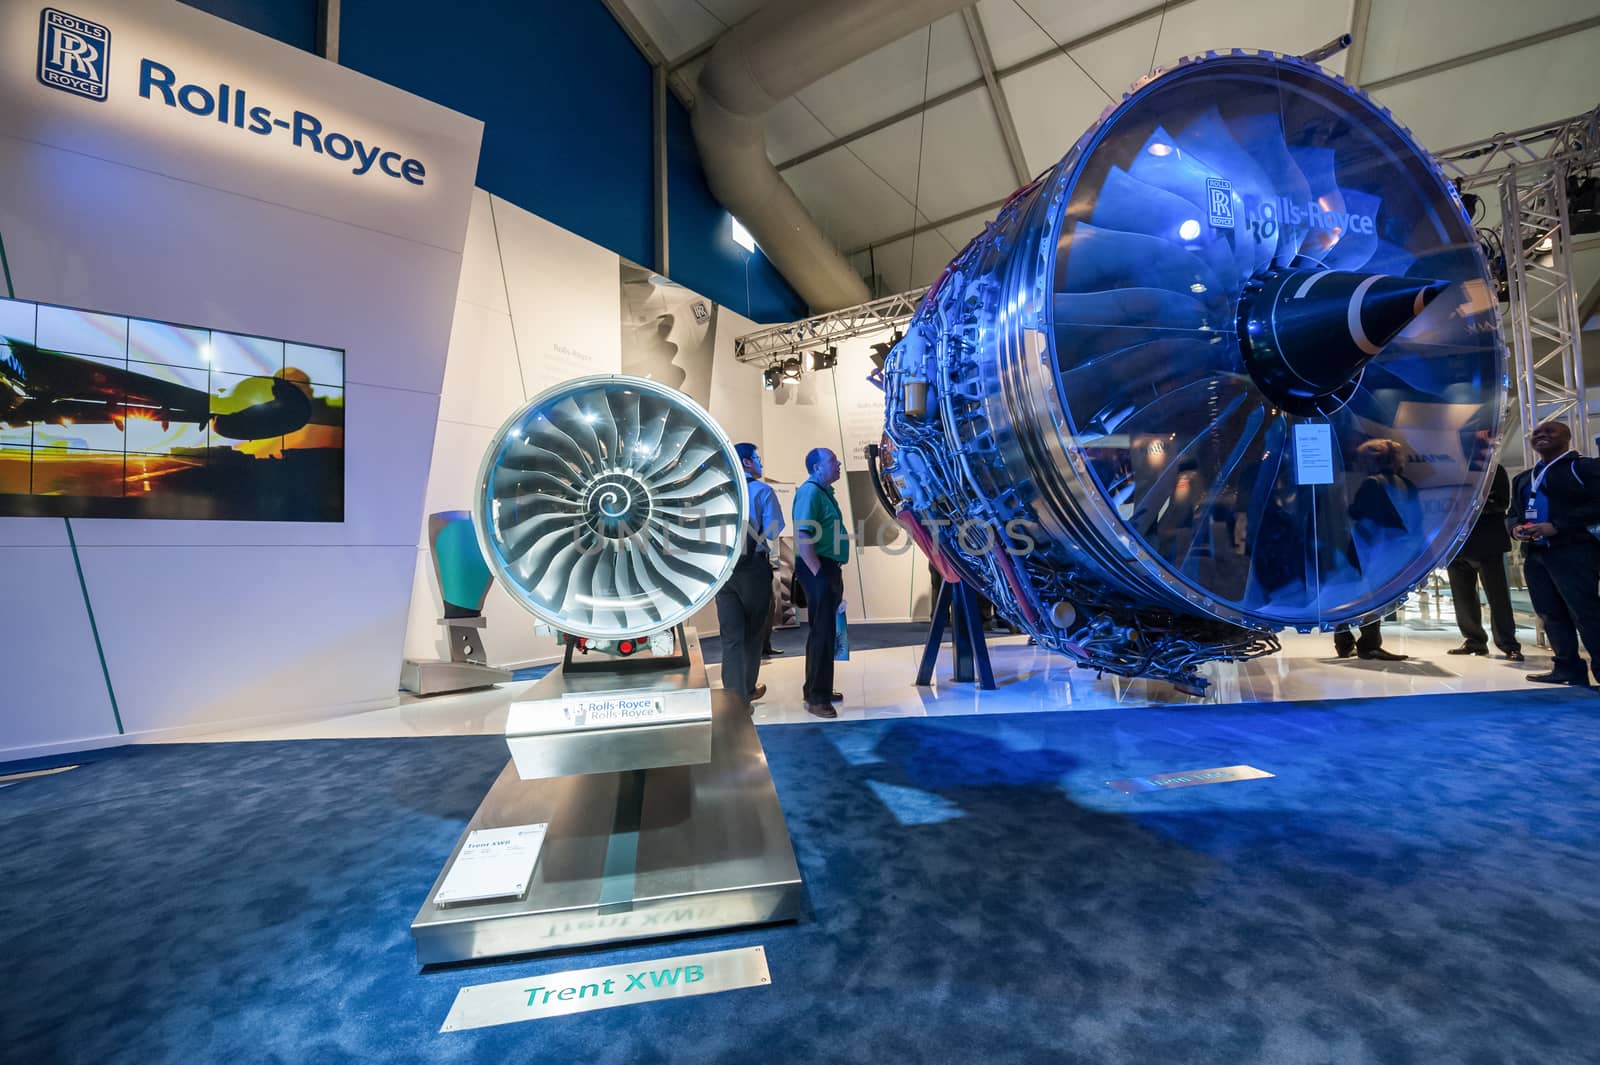 An exhibition by Rolls-Royce jet engines at the Farnborough Airshow, UK on July 12, 2012